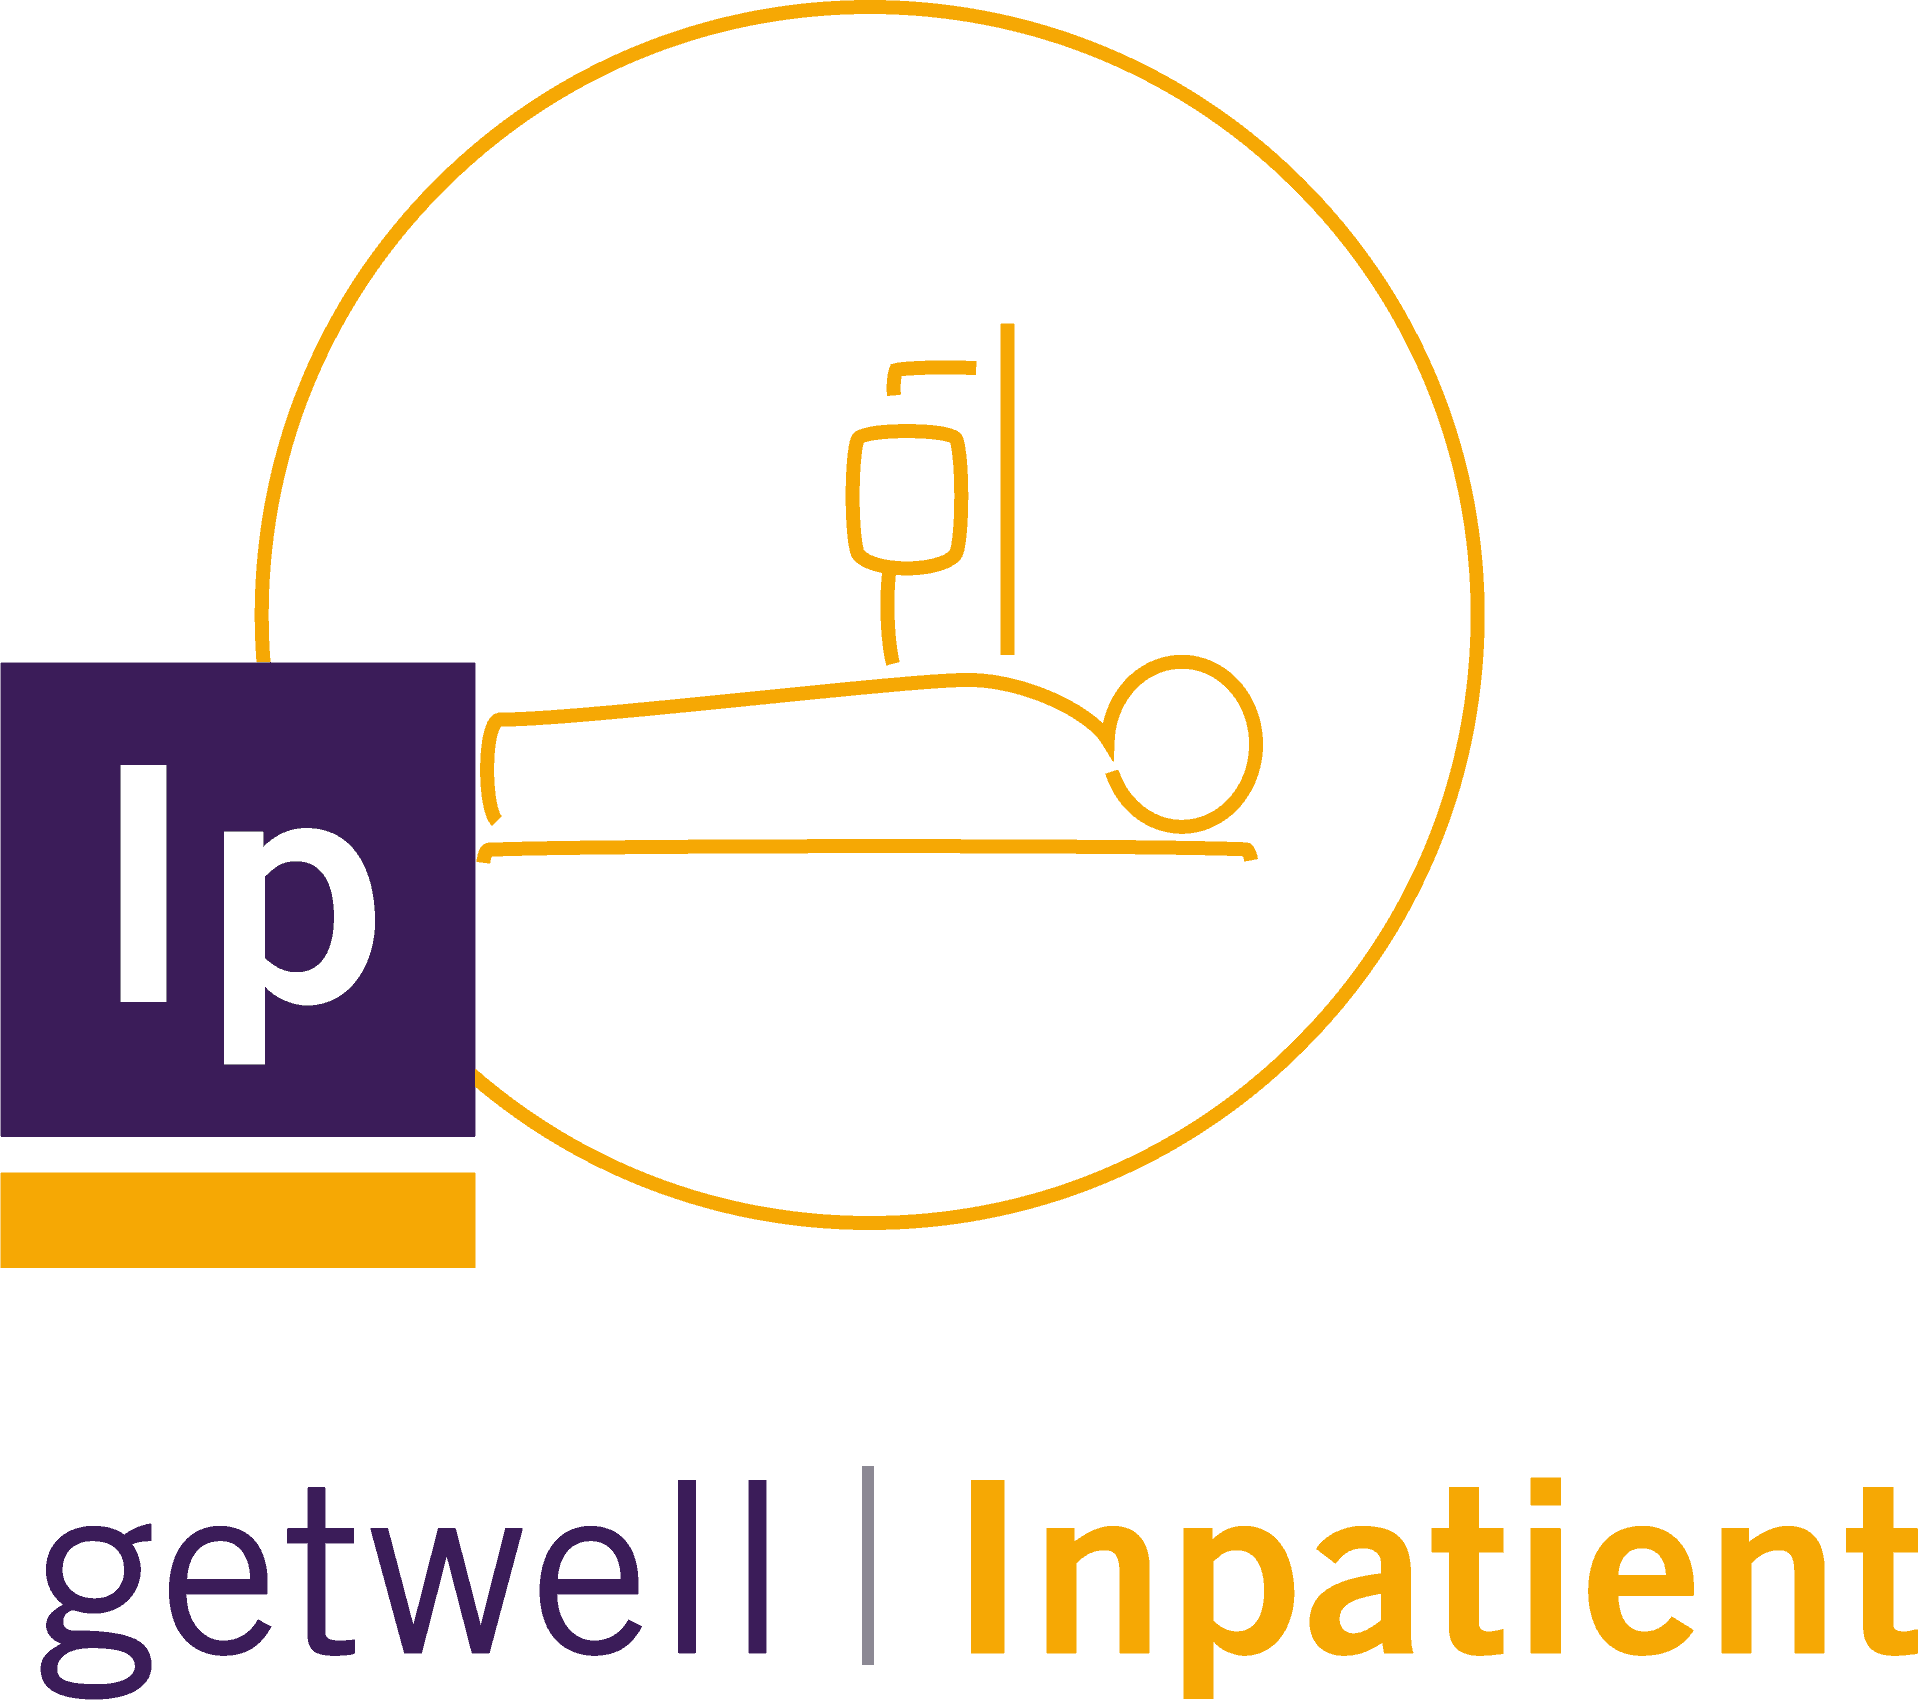 GetWell_Inpatient_lockup_bug_lineicon